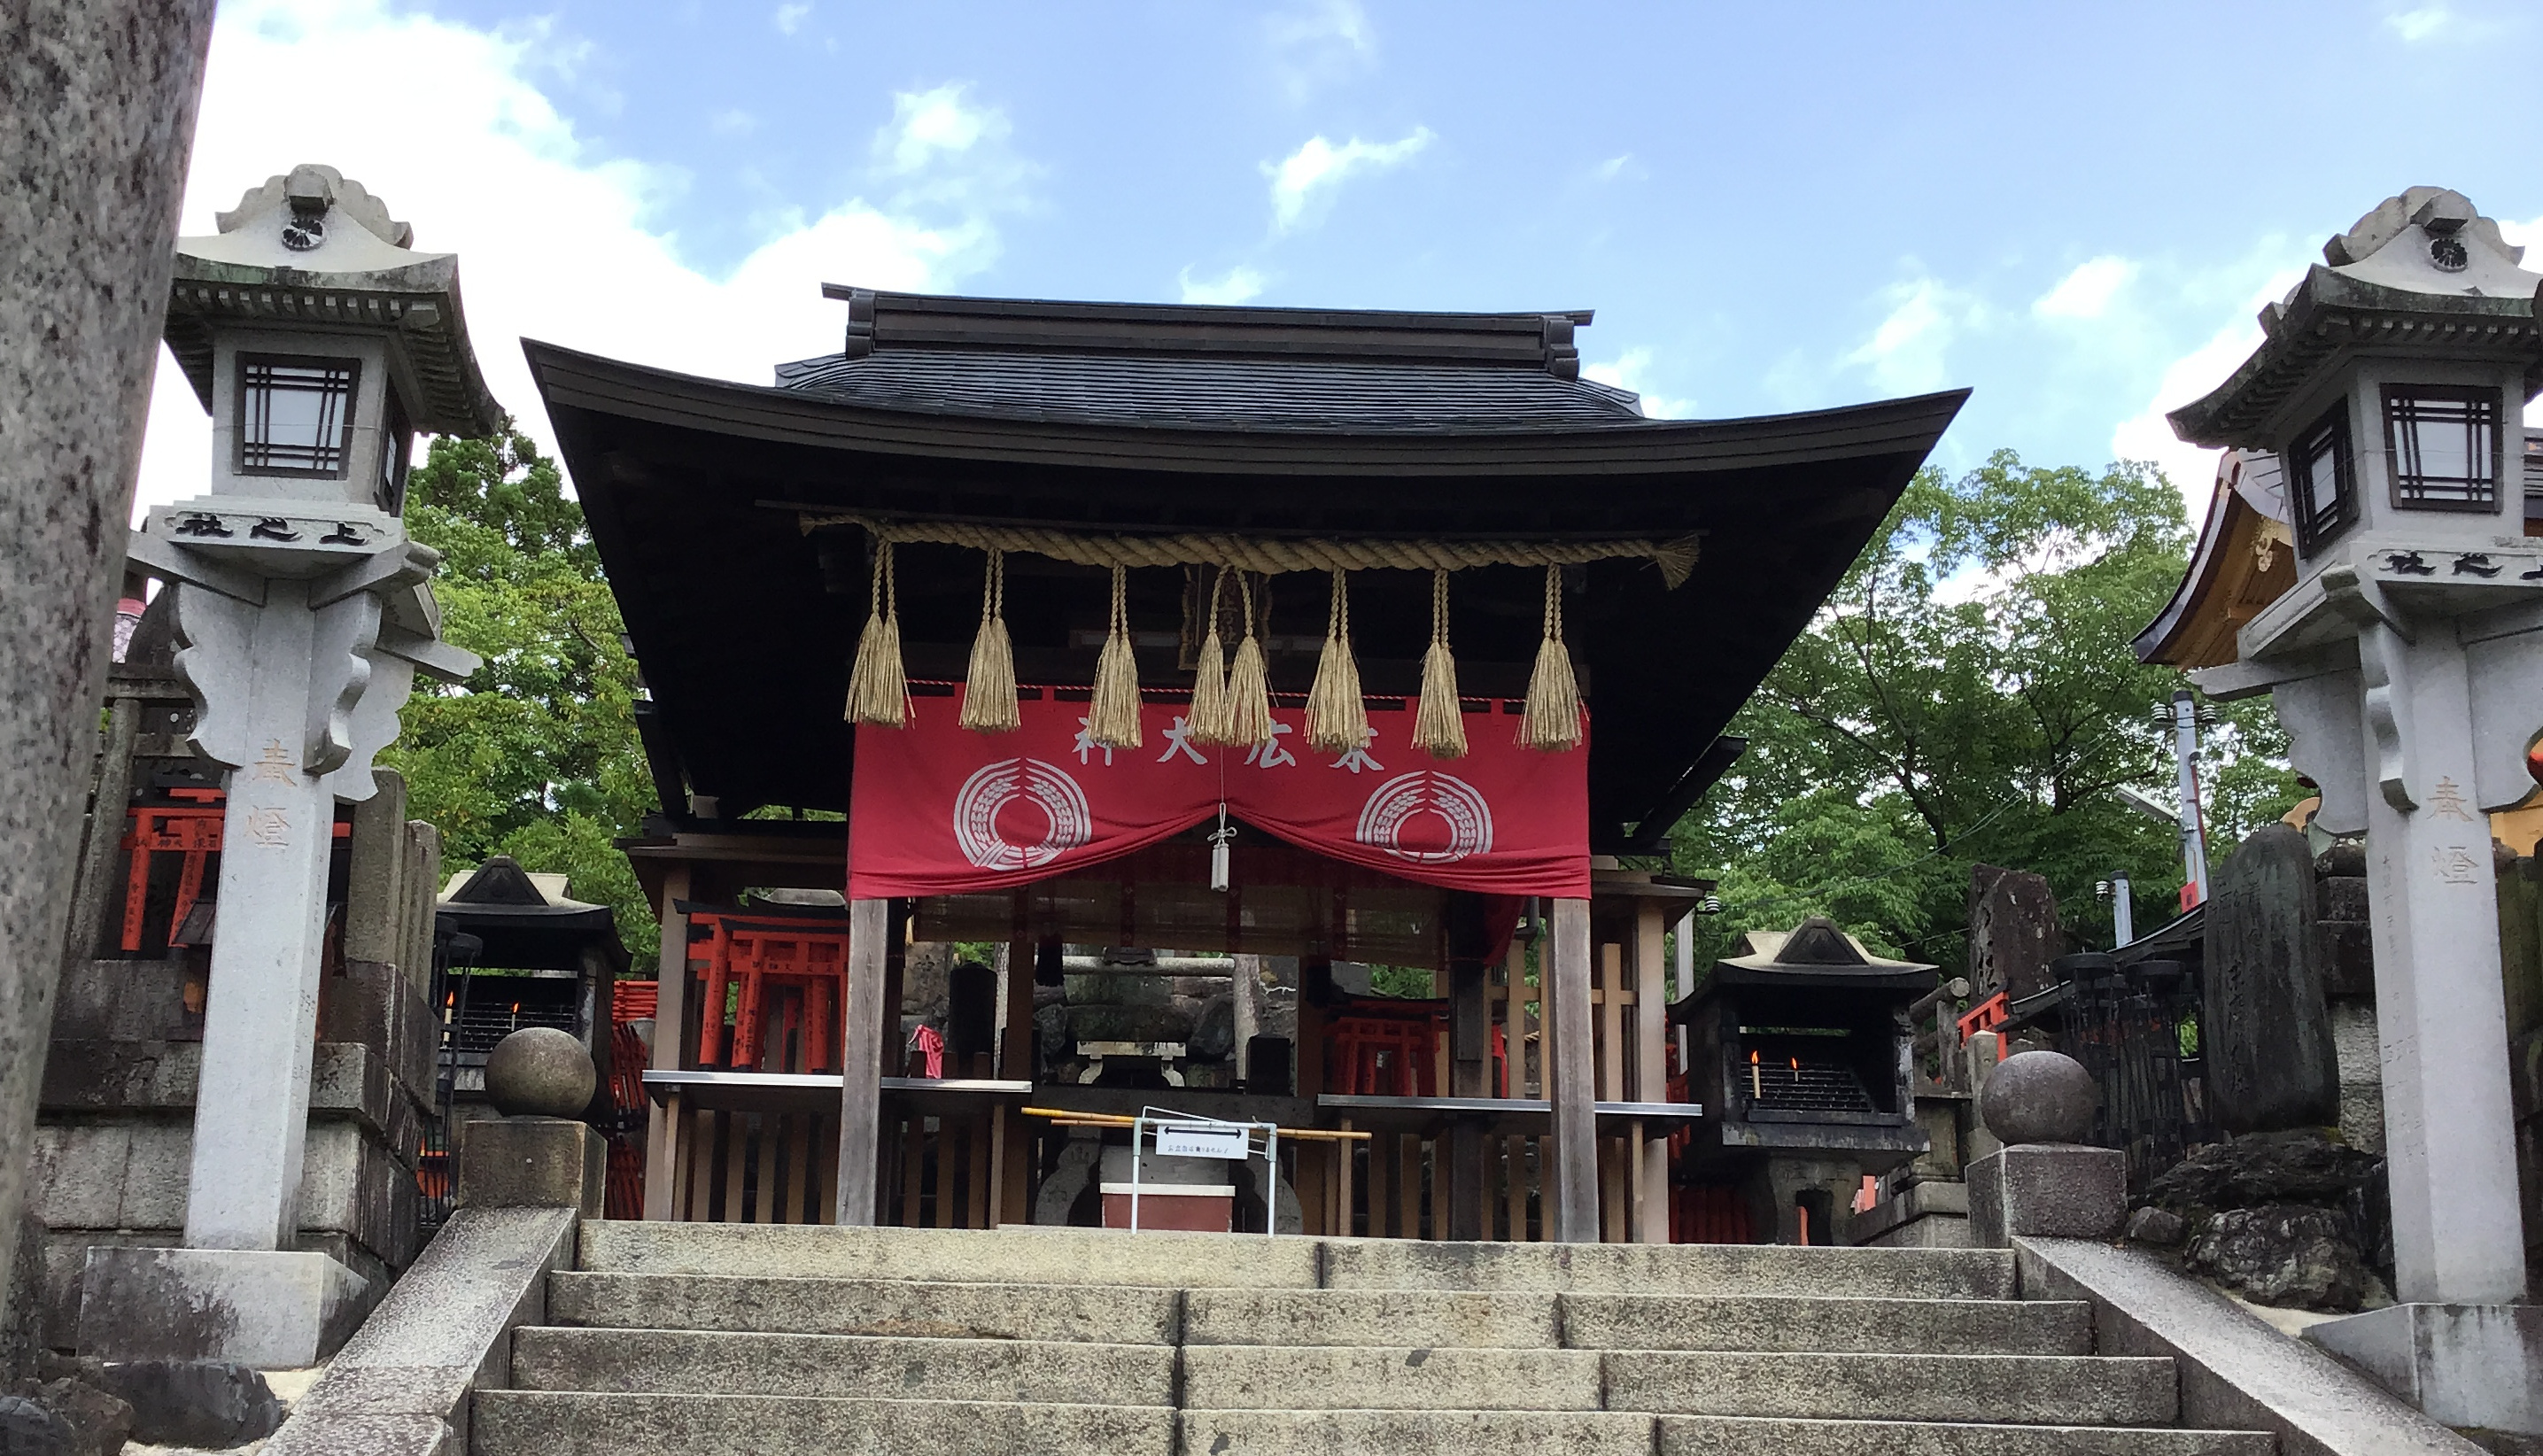 The shrine at the end of the thousand torii gate path